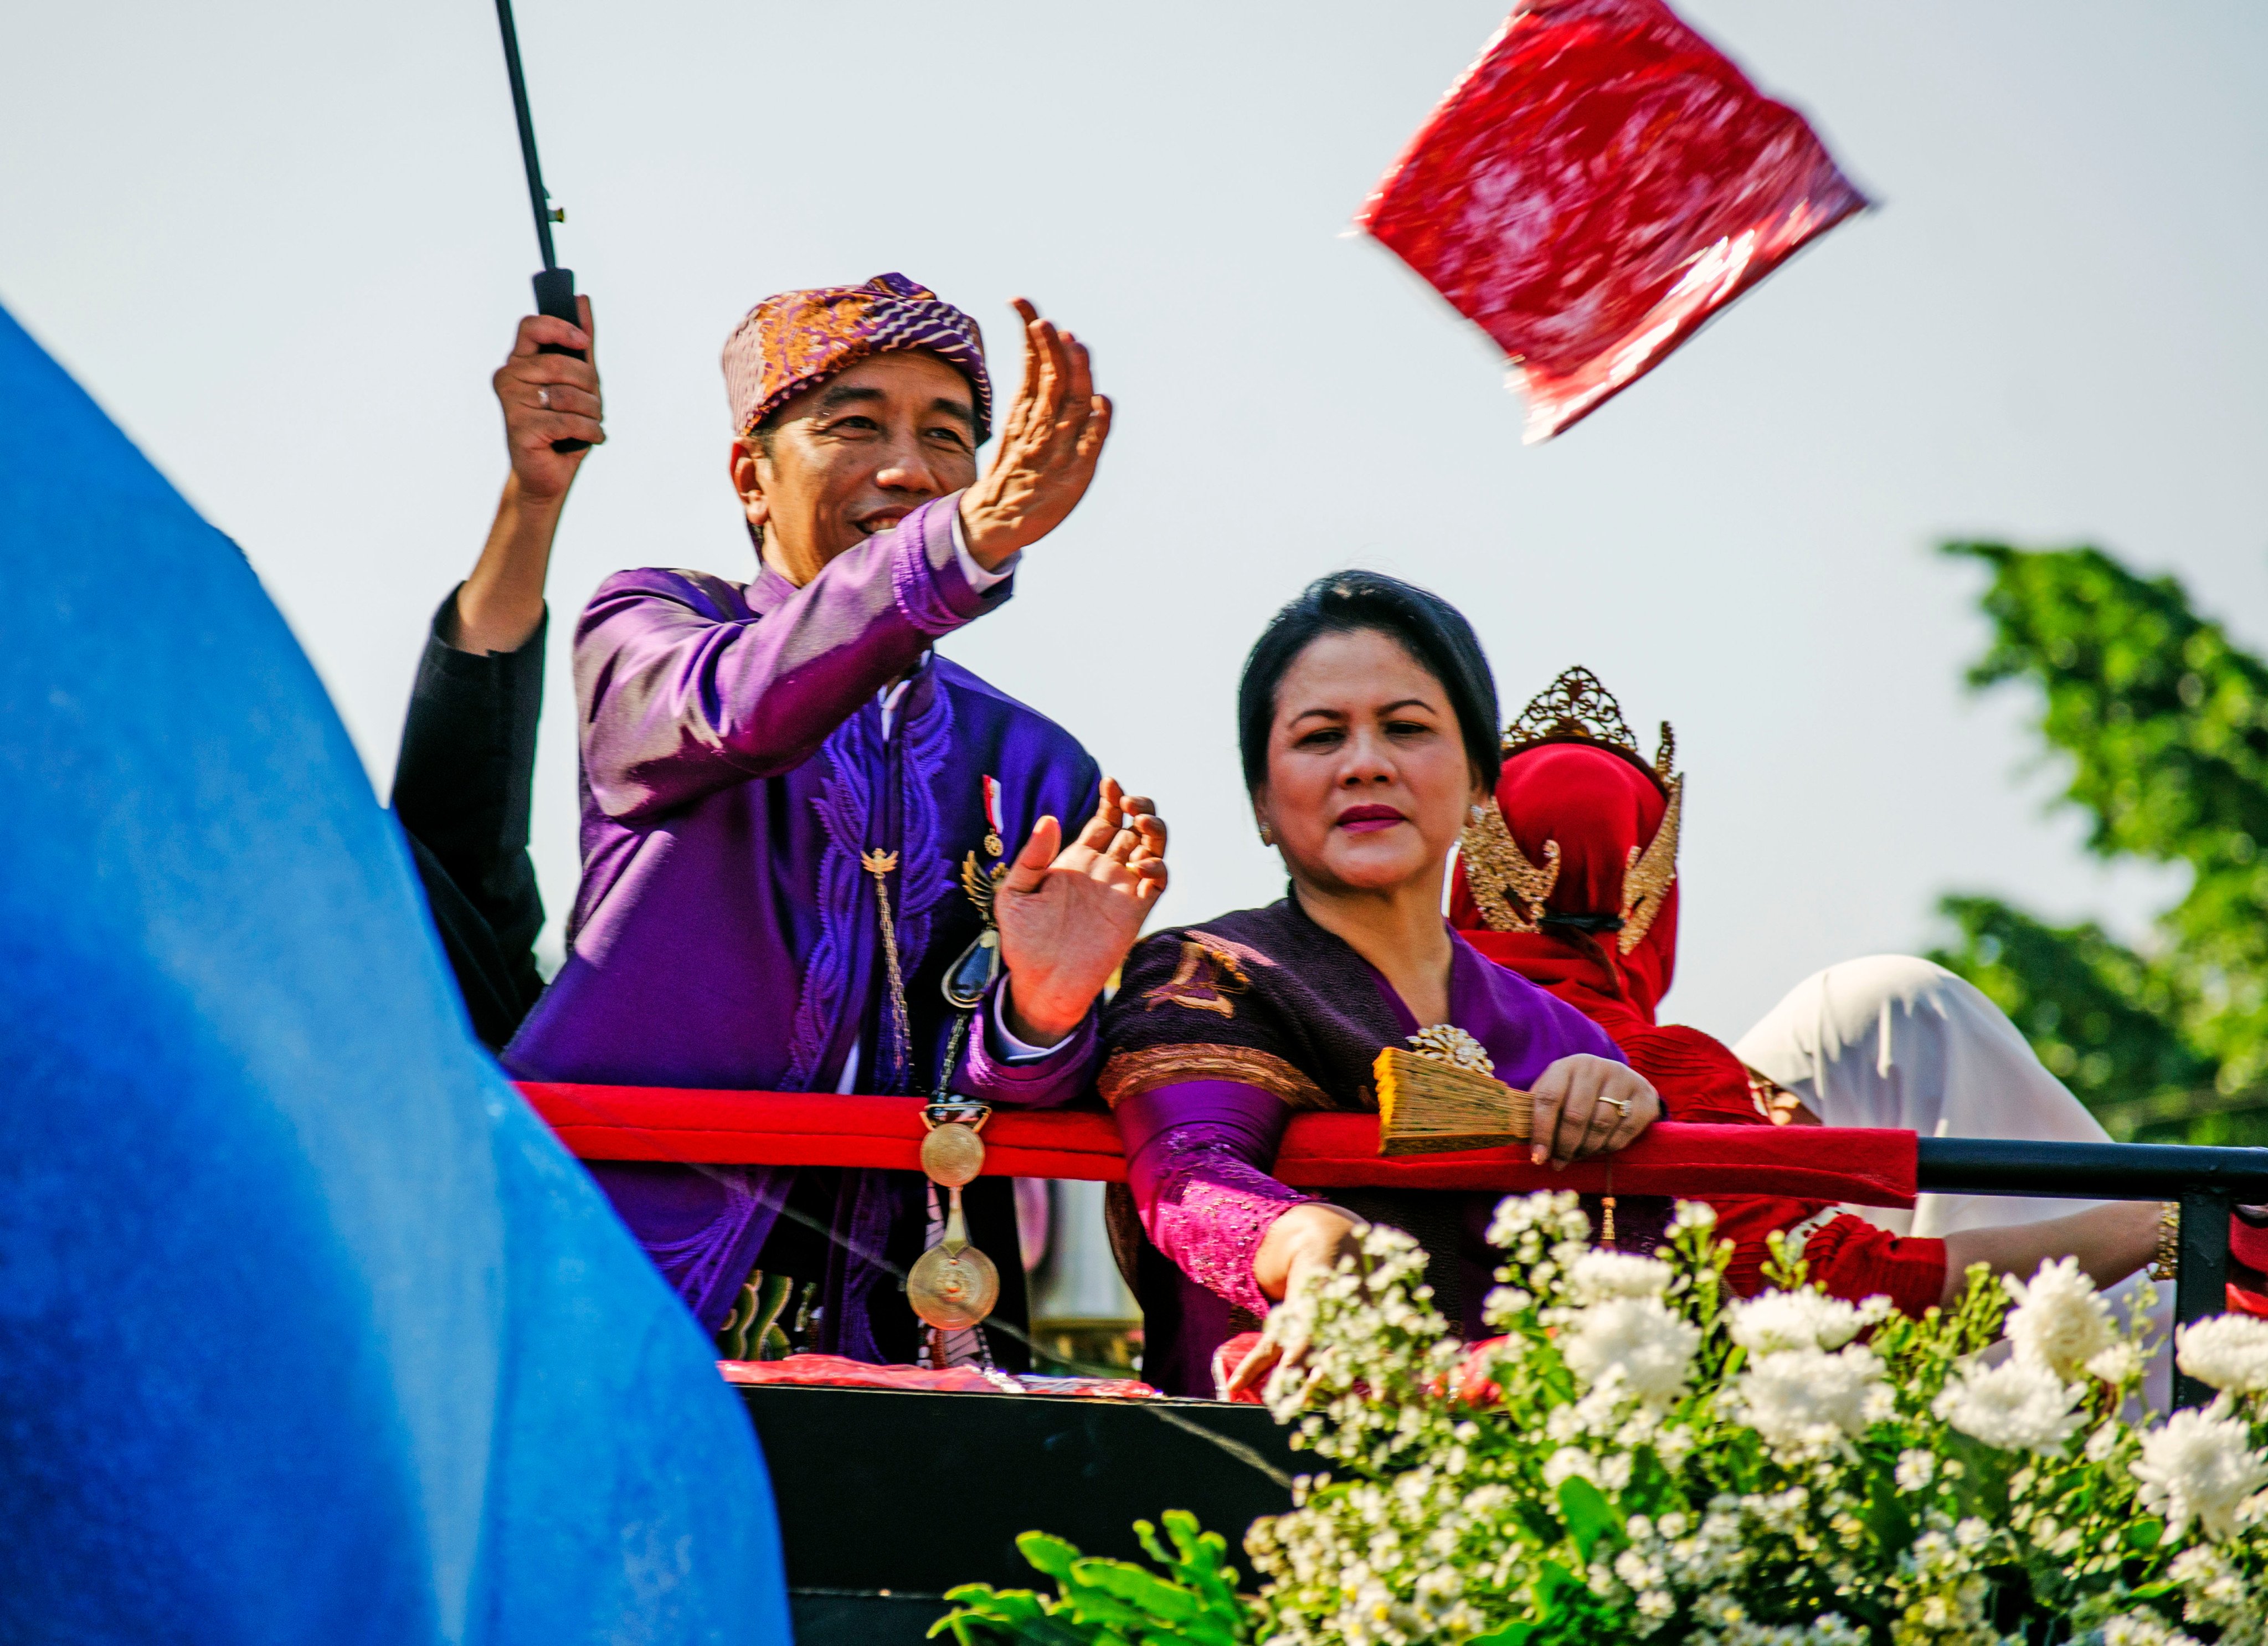 Indonesian President Joko Widodo and his wife Iriana at an event in Bandung, West Java, on August 26, 2017. Photo: Shutterstock 